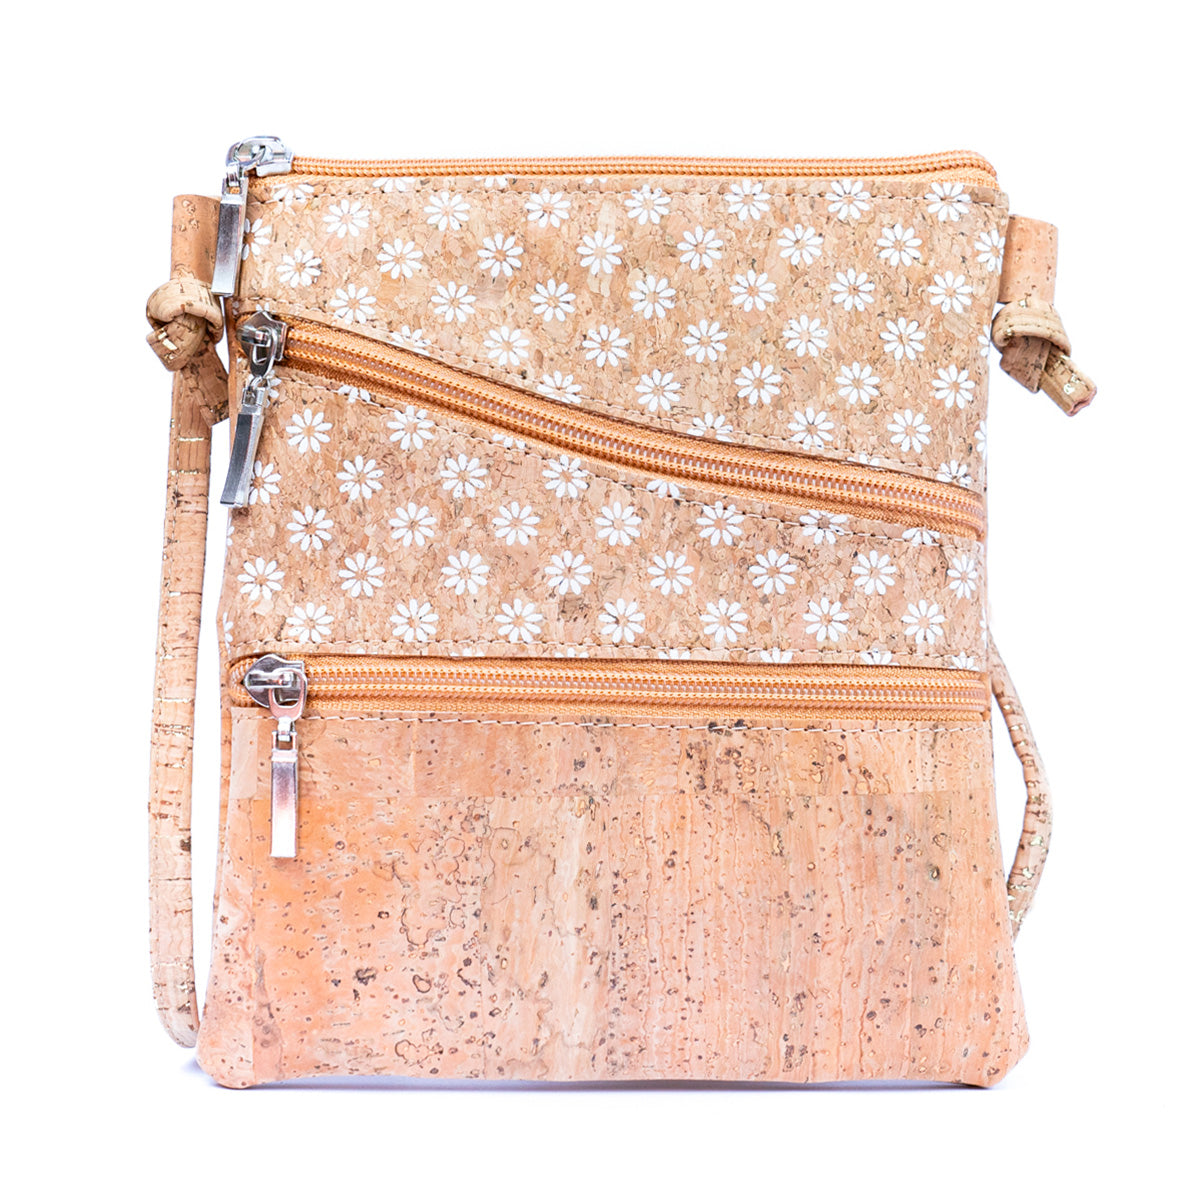 Selected White Print Stitching Cork Zipper Crossbody Bag | THE CORK COLLECTION